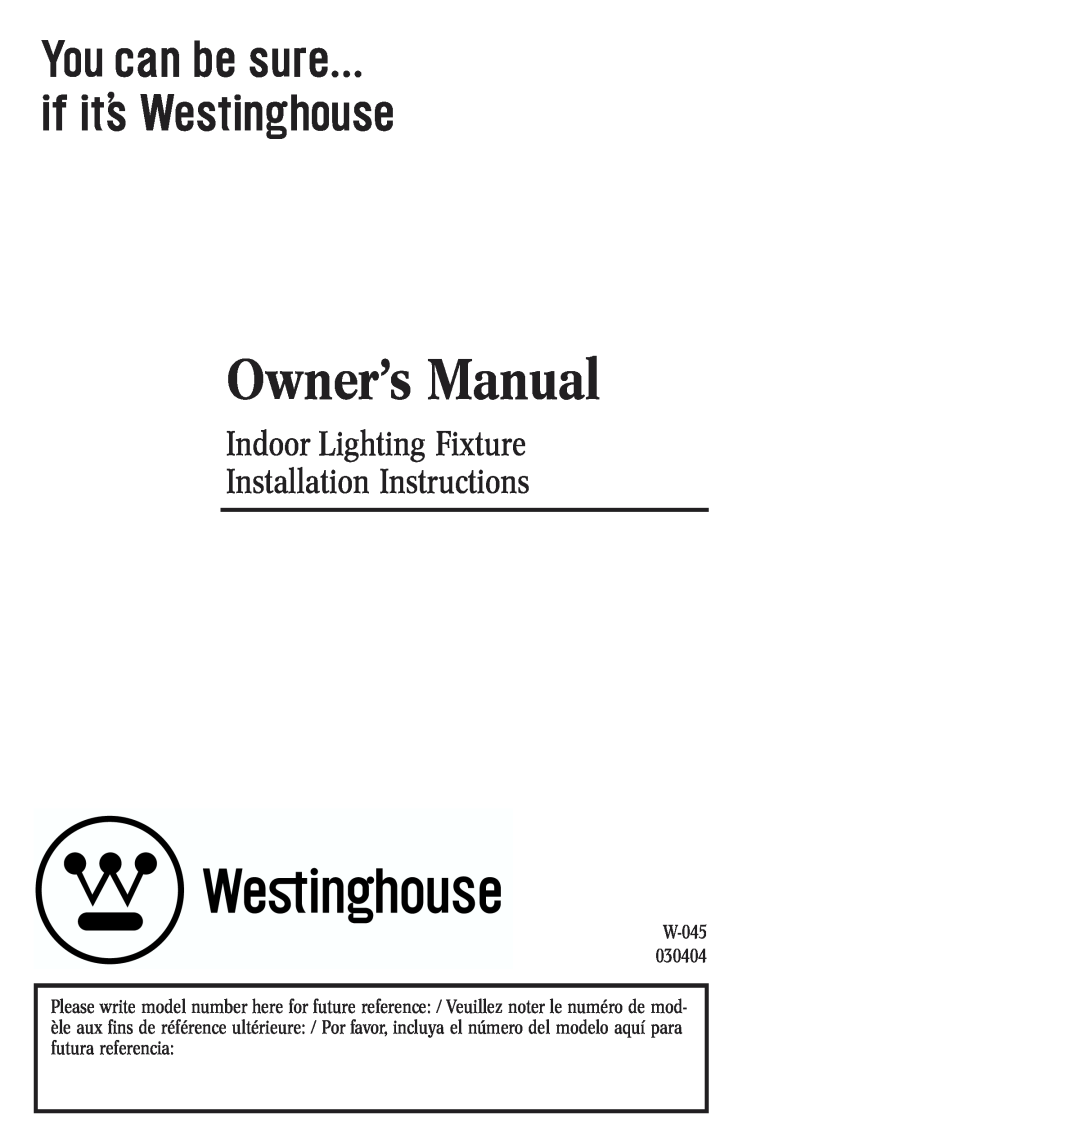 Westinghouse W-045 owner manual Indoor Lighting Fixture Installation Instructions 